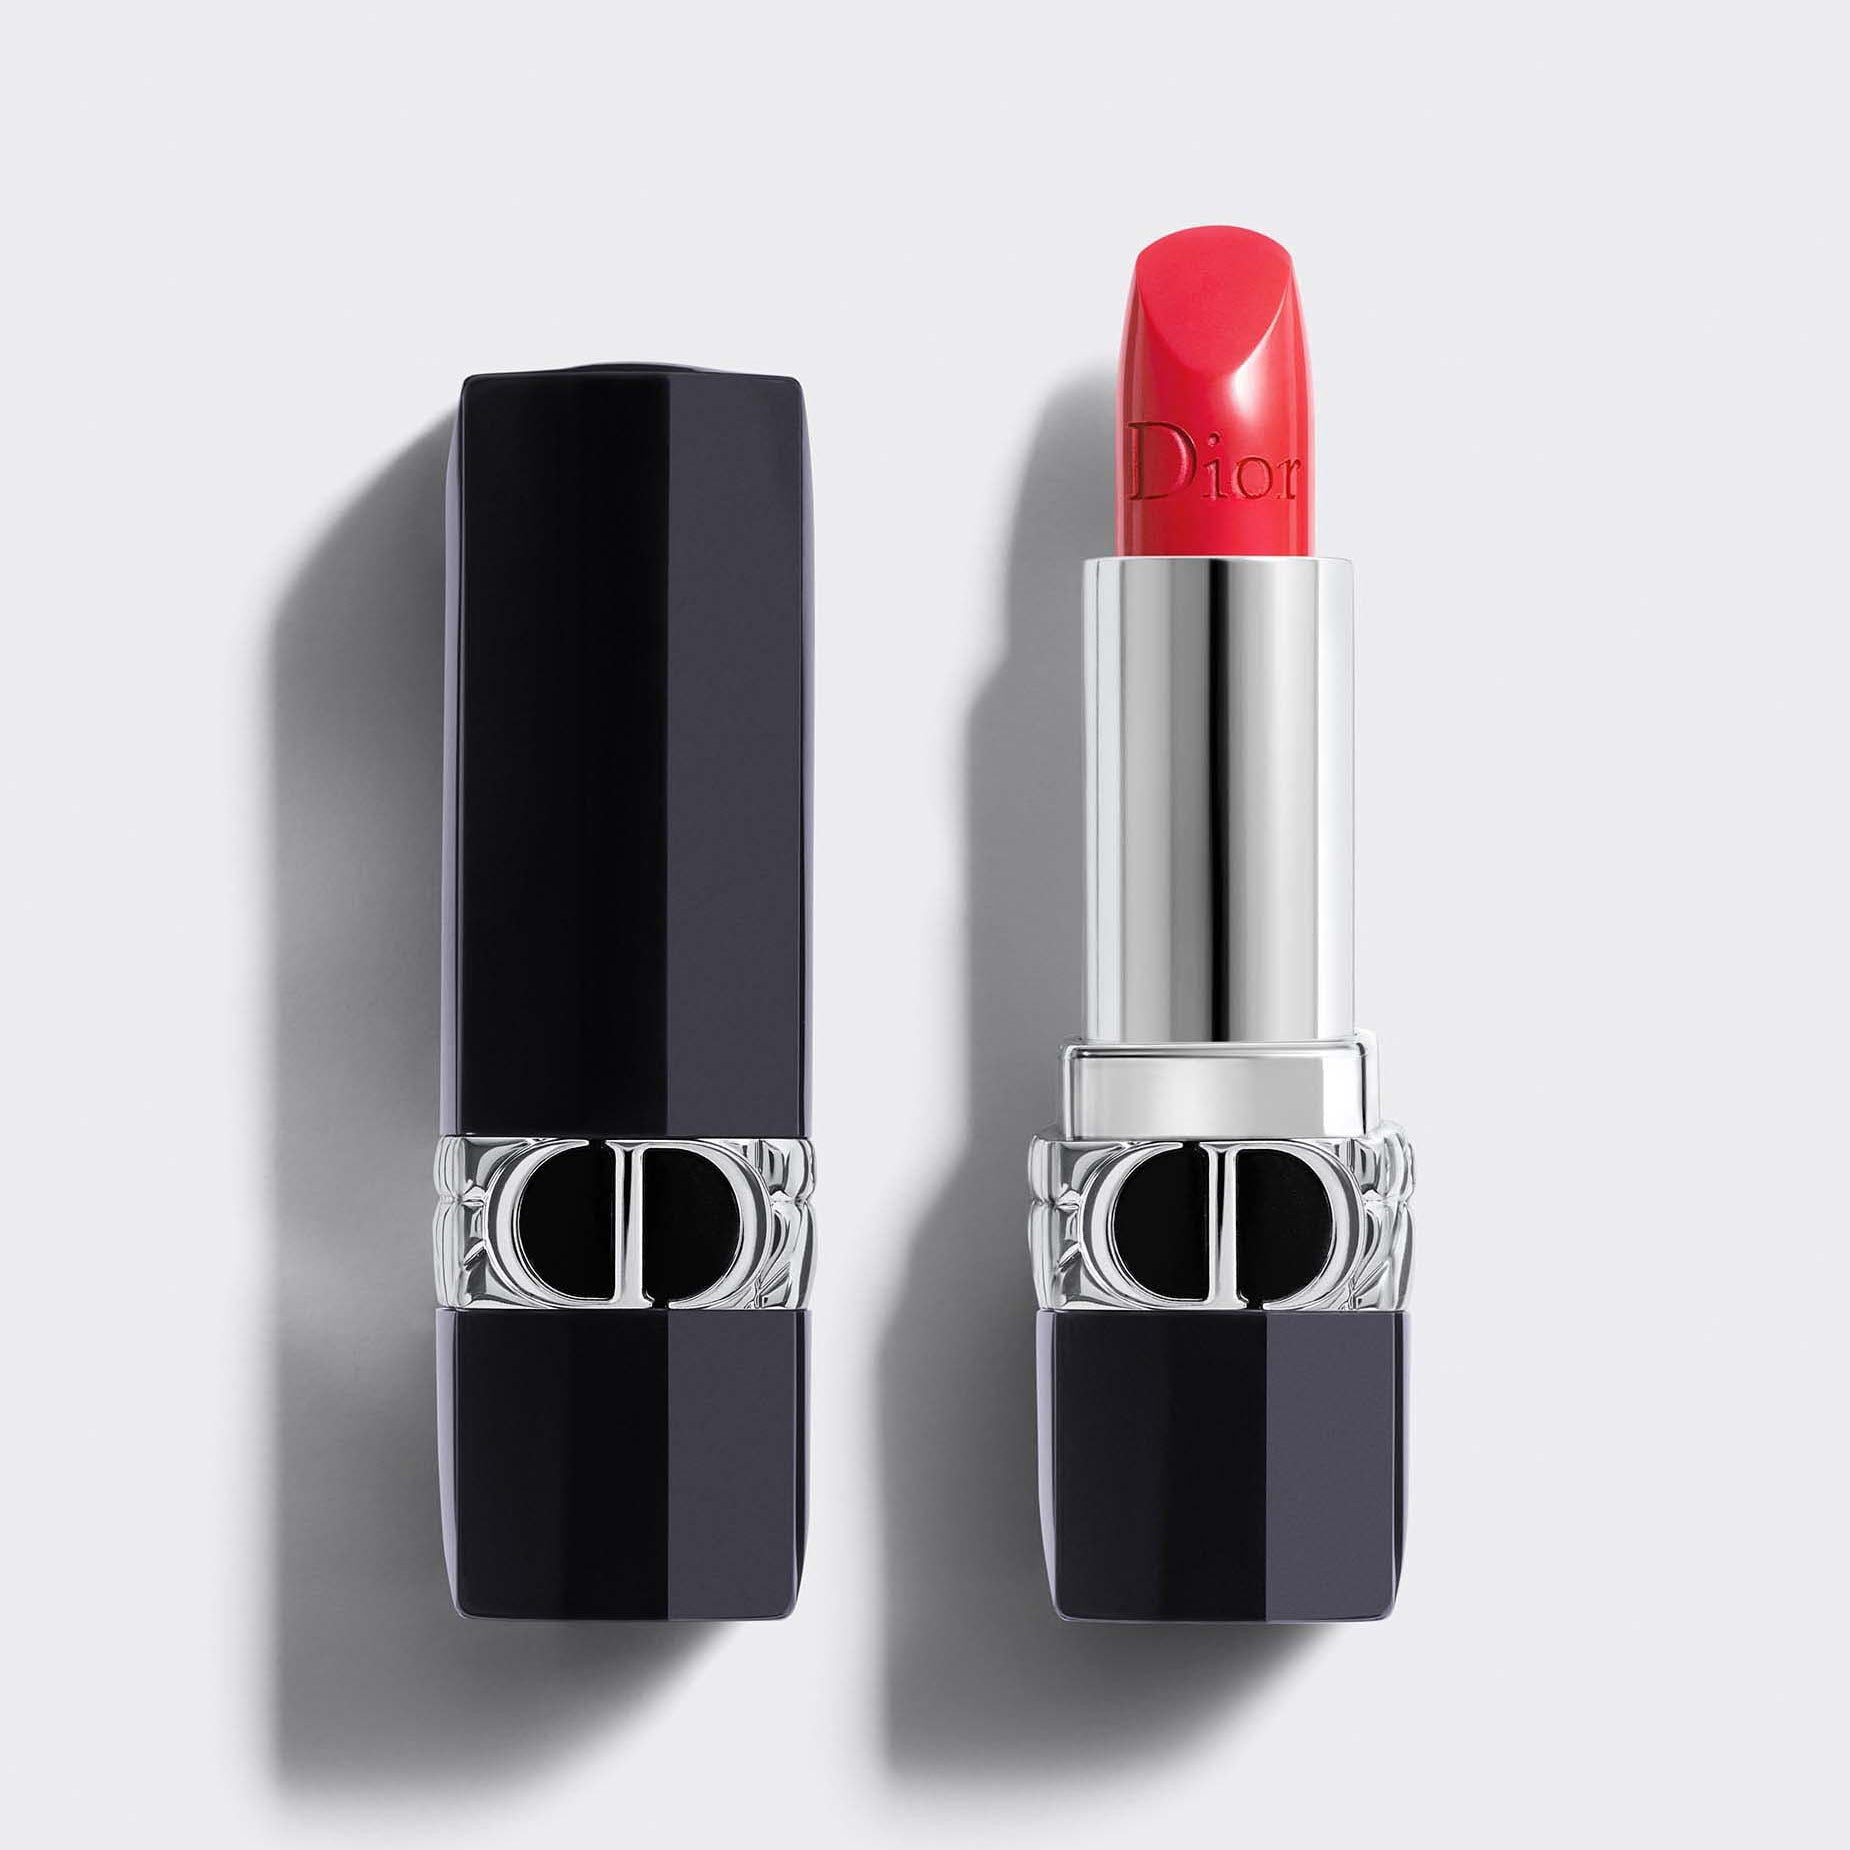 ROUGE DIOR ~ Refillable lipstick with 4 couture finishes: satin, matte, metallic & new velvet